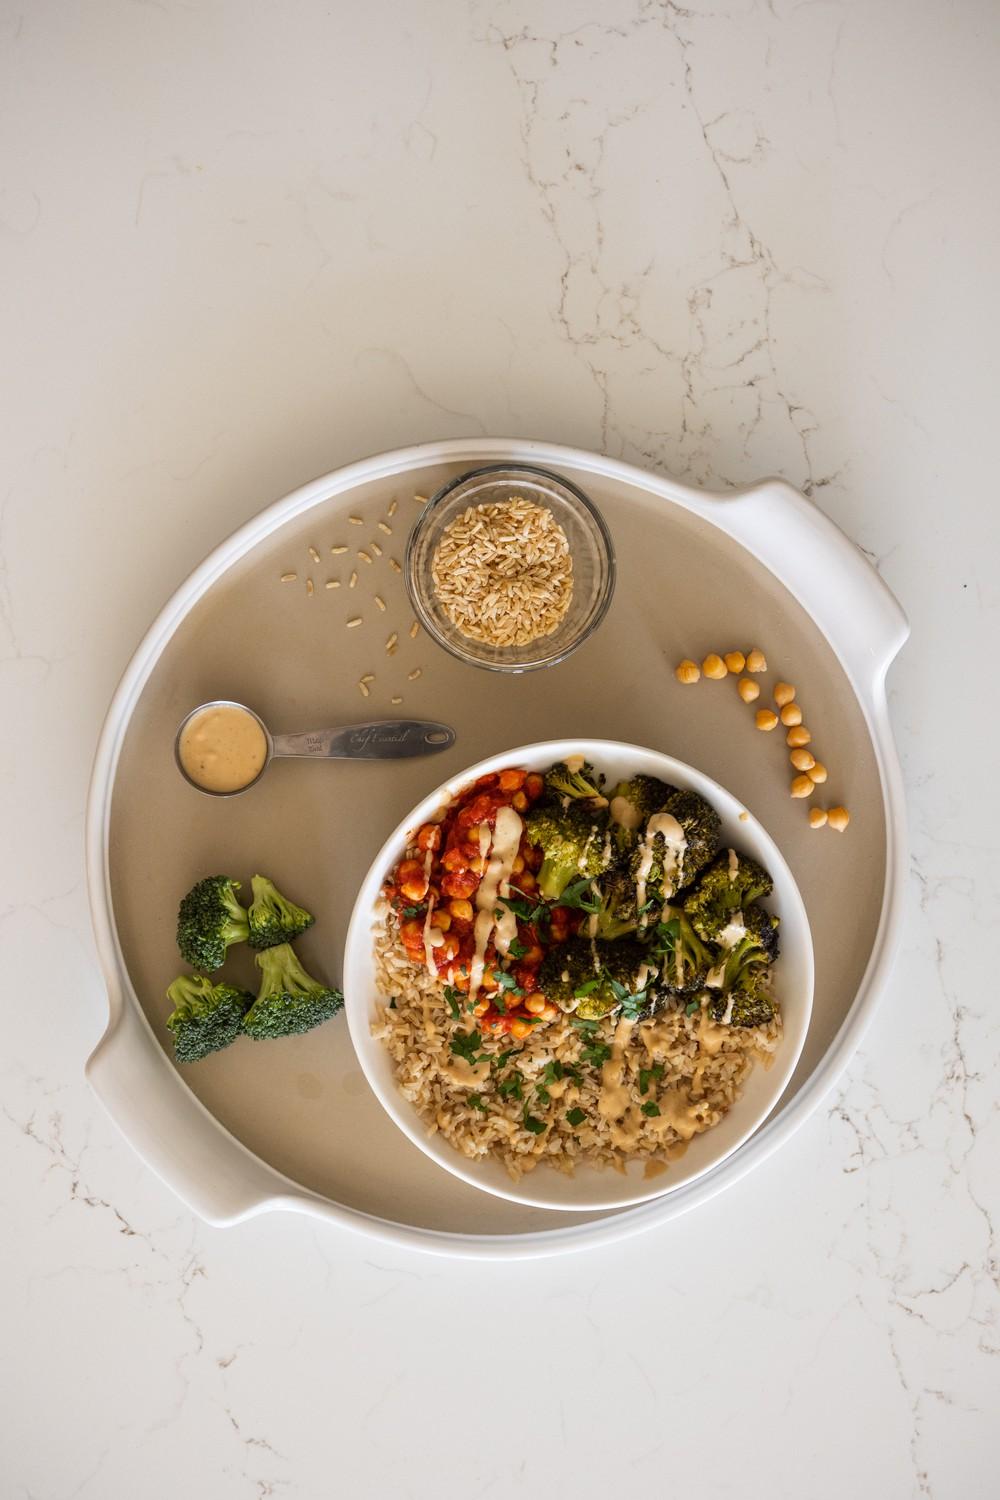 One can customize the "Bowling for Rice" Veggie and Grain Bowl to fit their food needs and likes, such as swapping brown rice for quinoa or broccoli for sweet potato. This meal contains ingredients with protein and carbohydrates as well as produce grown at local farms.